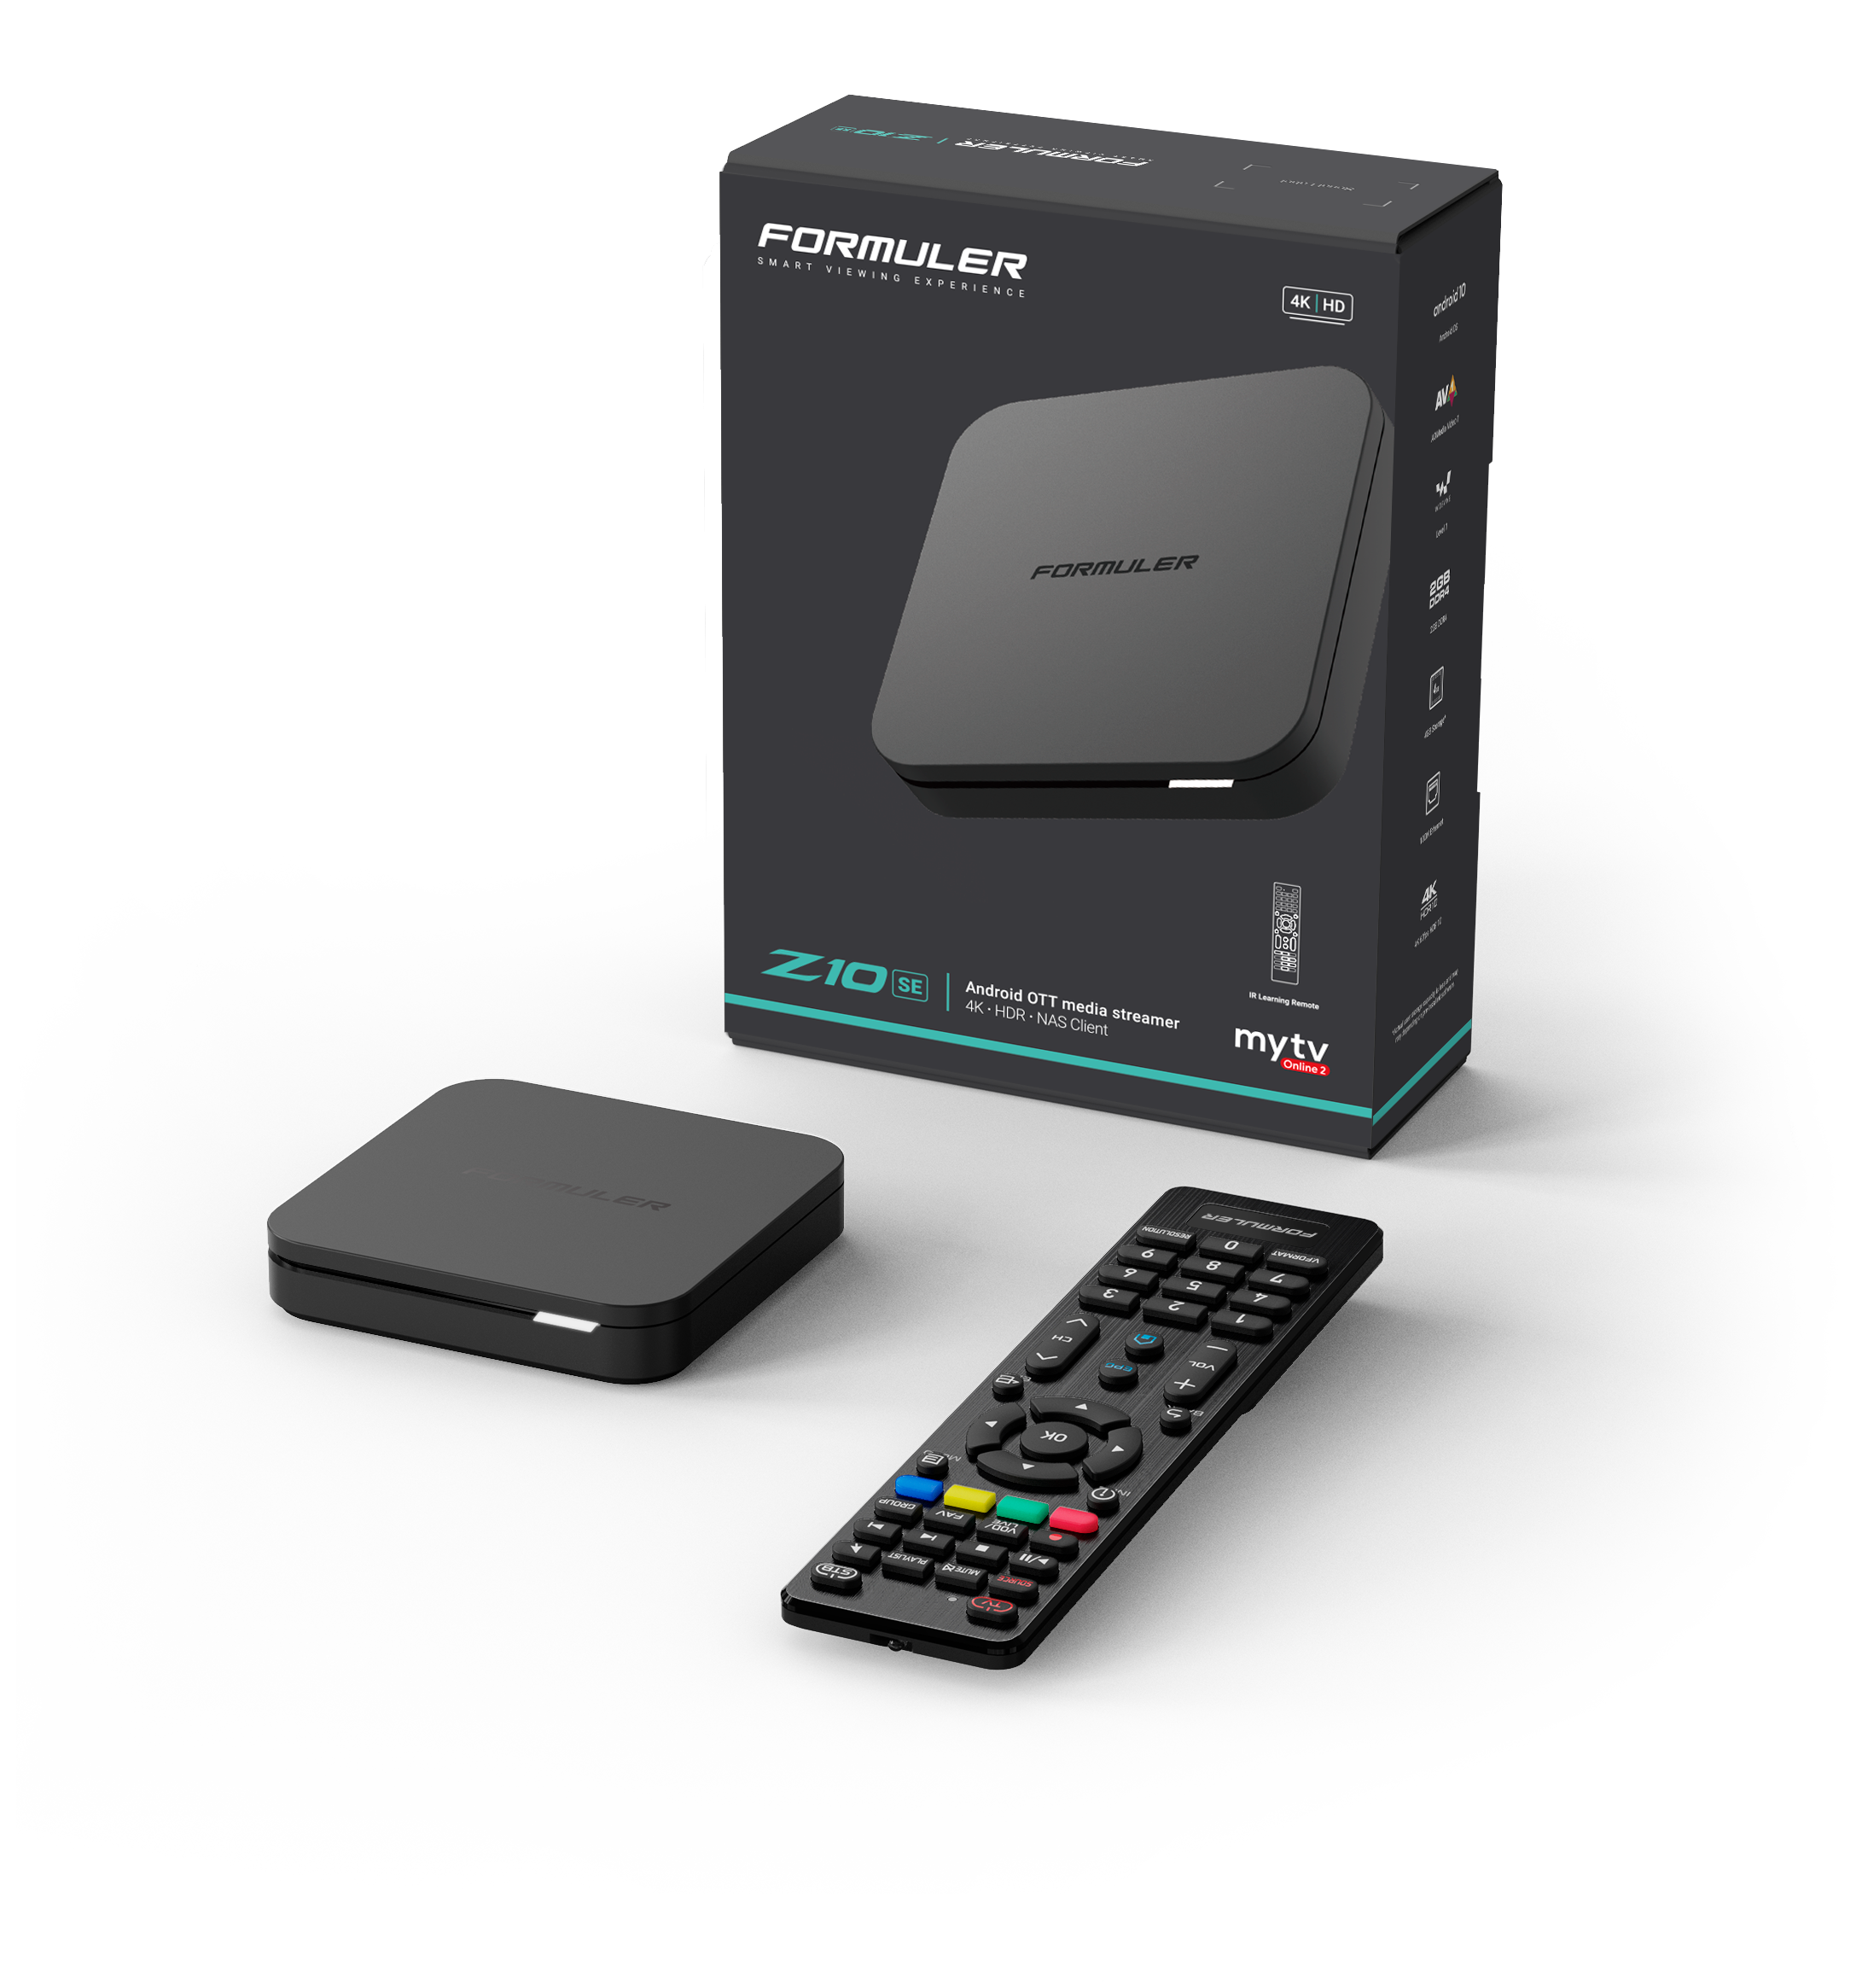 Formuler Z10  SE - The most affordable Android box